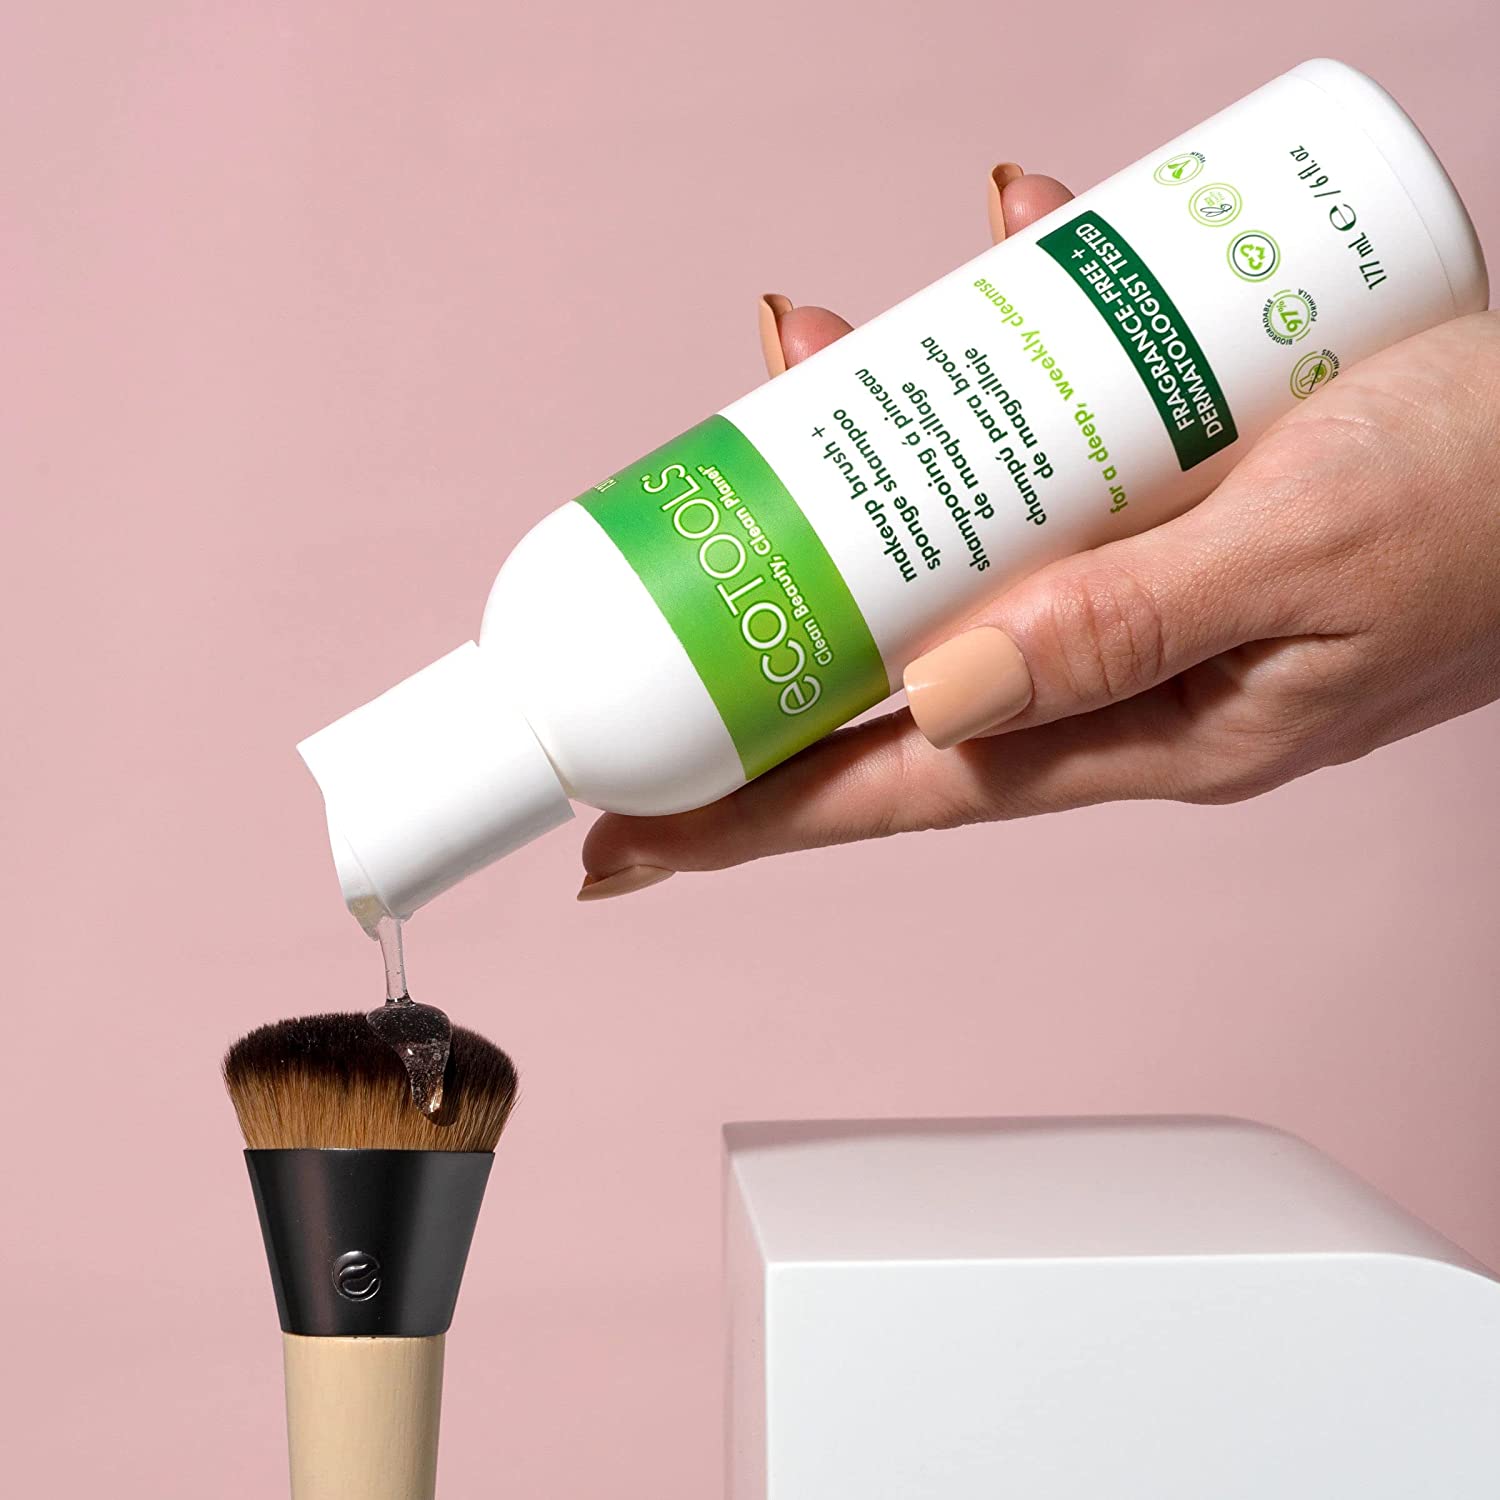 EcoTools Professional Makeup Cleaner for Makeup Brushes and Sponges as low as $4.28 After Coupon (Reg. $8) + Free Shipping – 46.3K+ FAB Ratings!